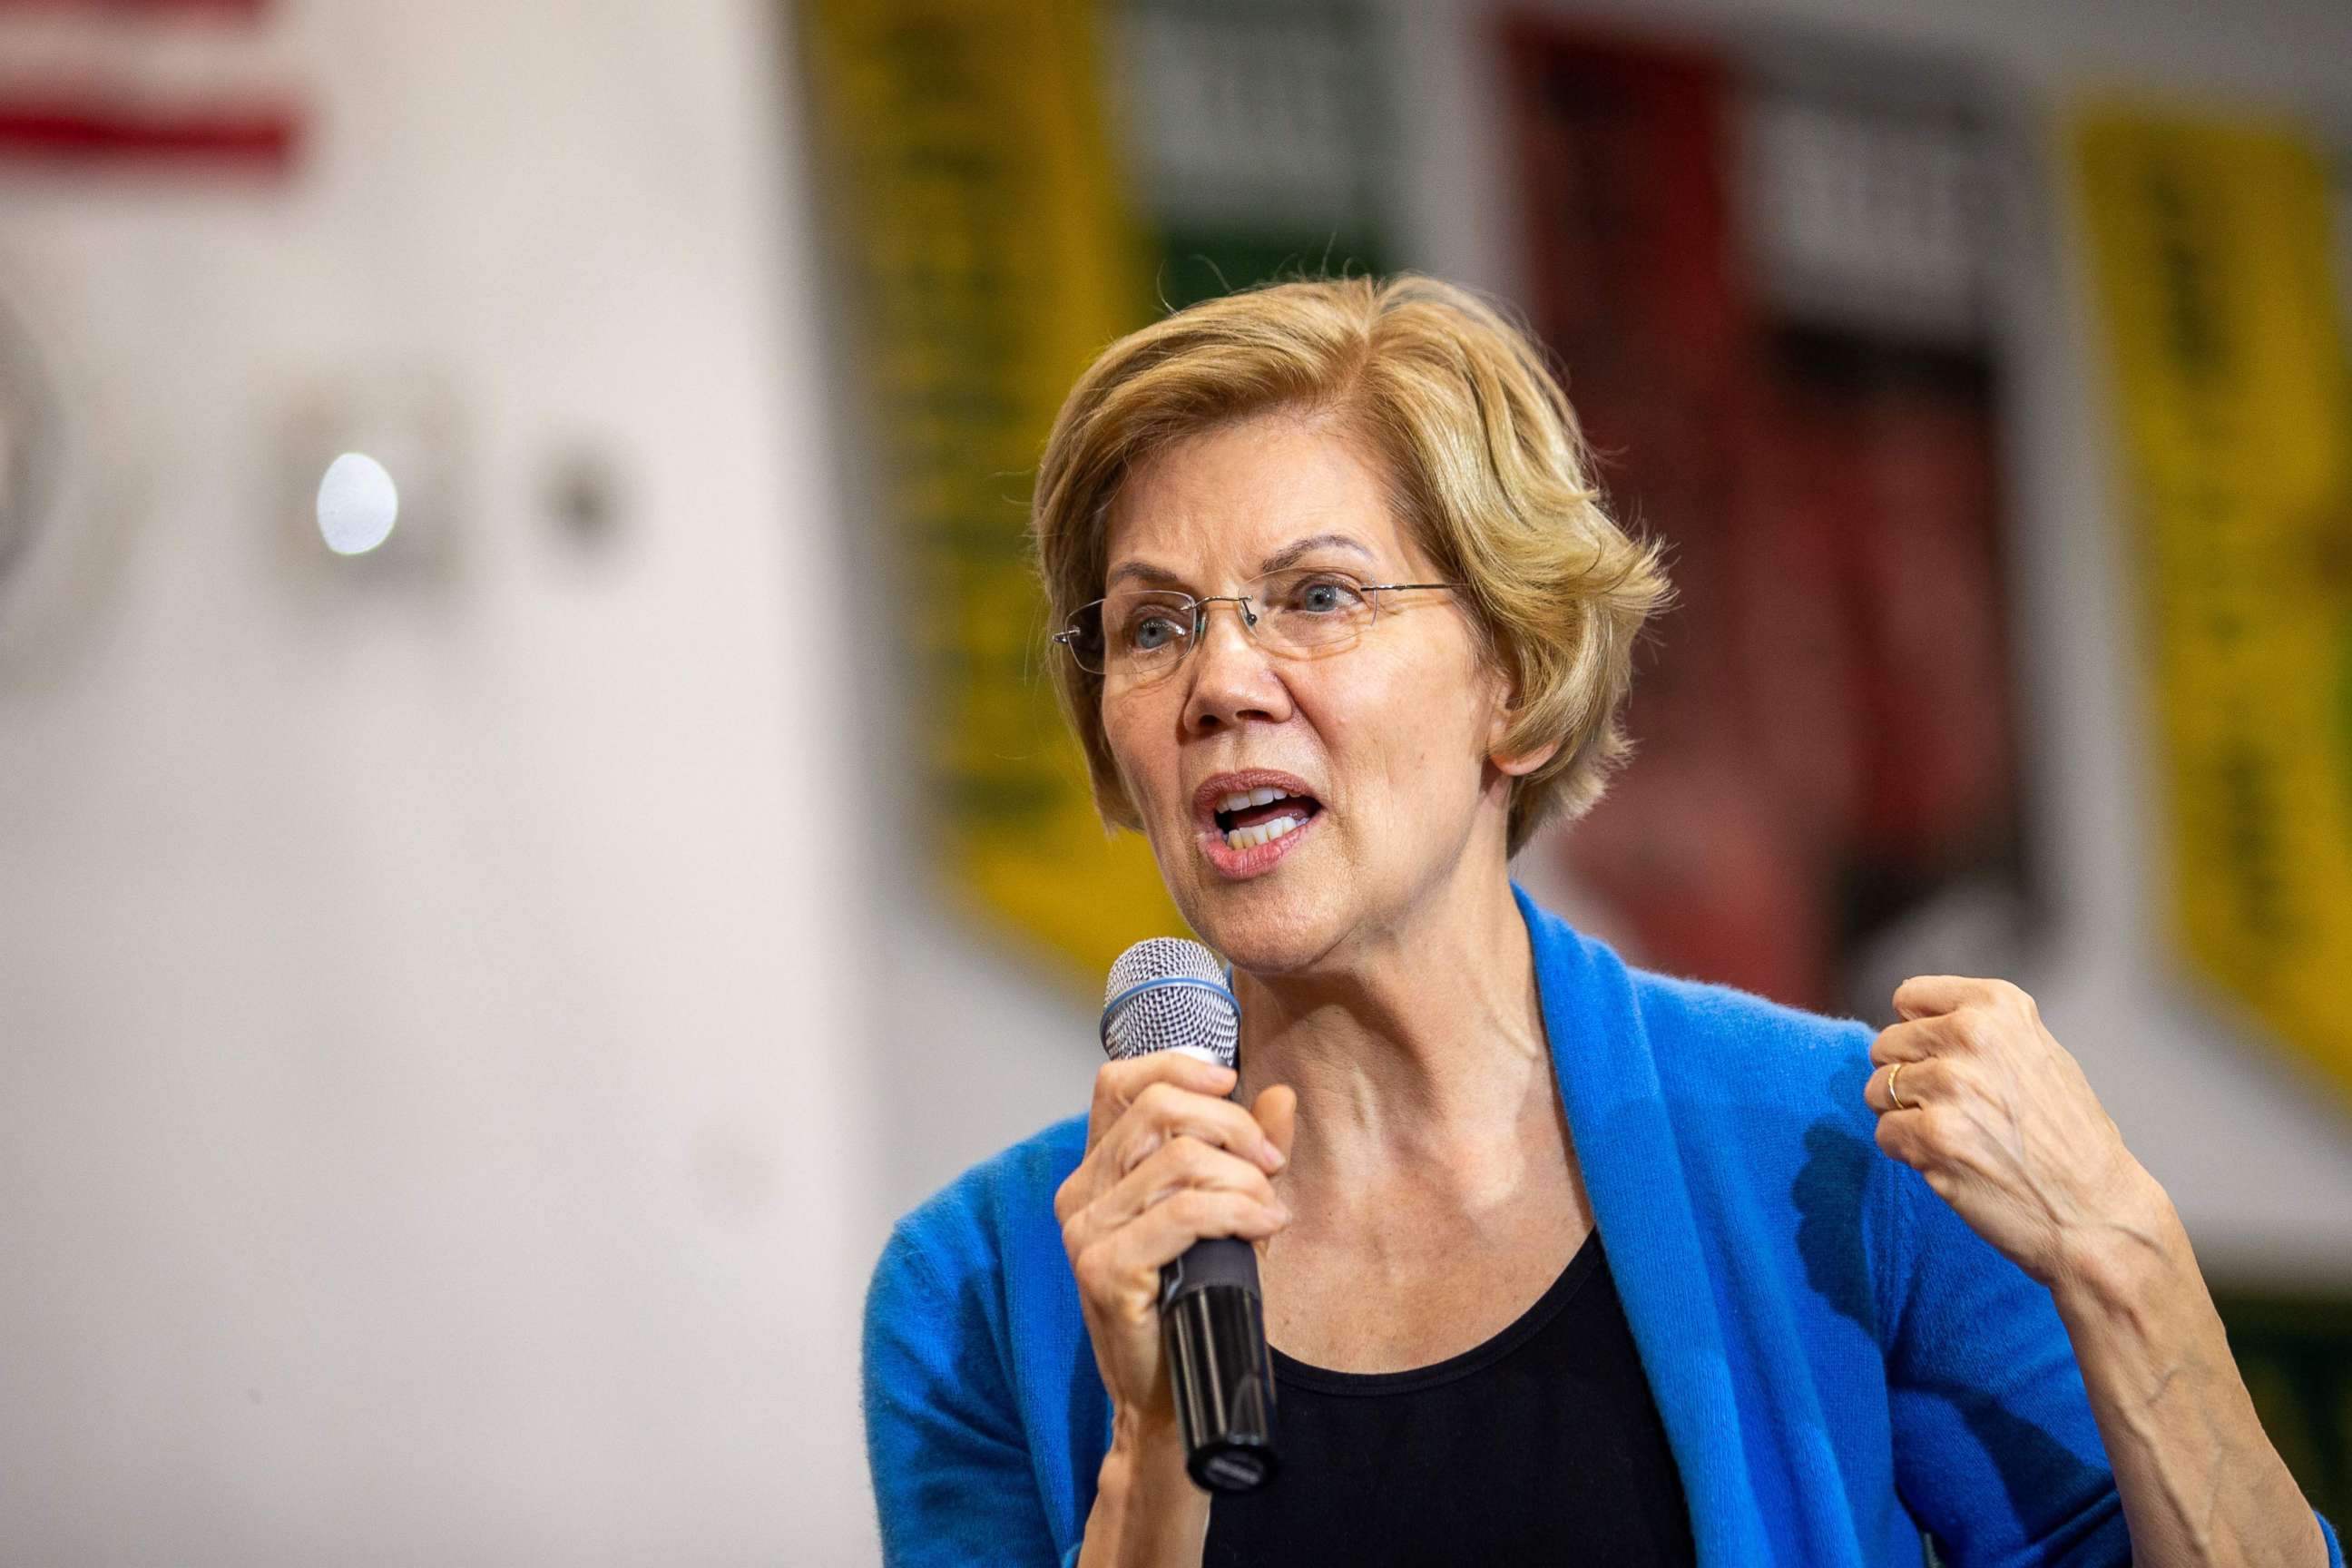 PHOTO: Elizabeth Warren speaks during a Get Out the Caucus Rally event in Iowa City, Iowa on Feb. 1, 2020.